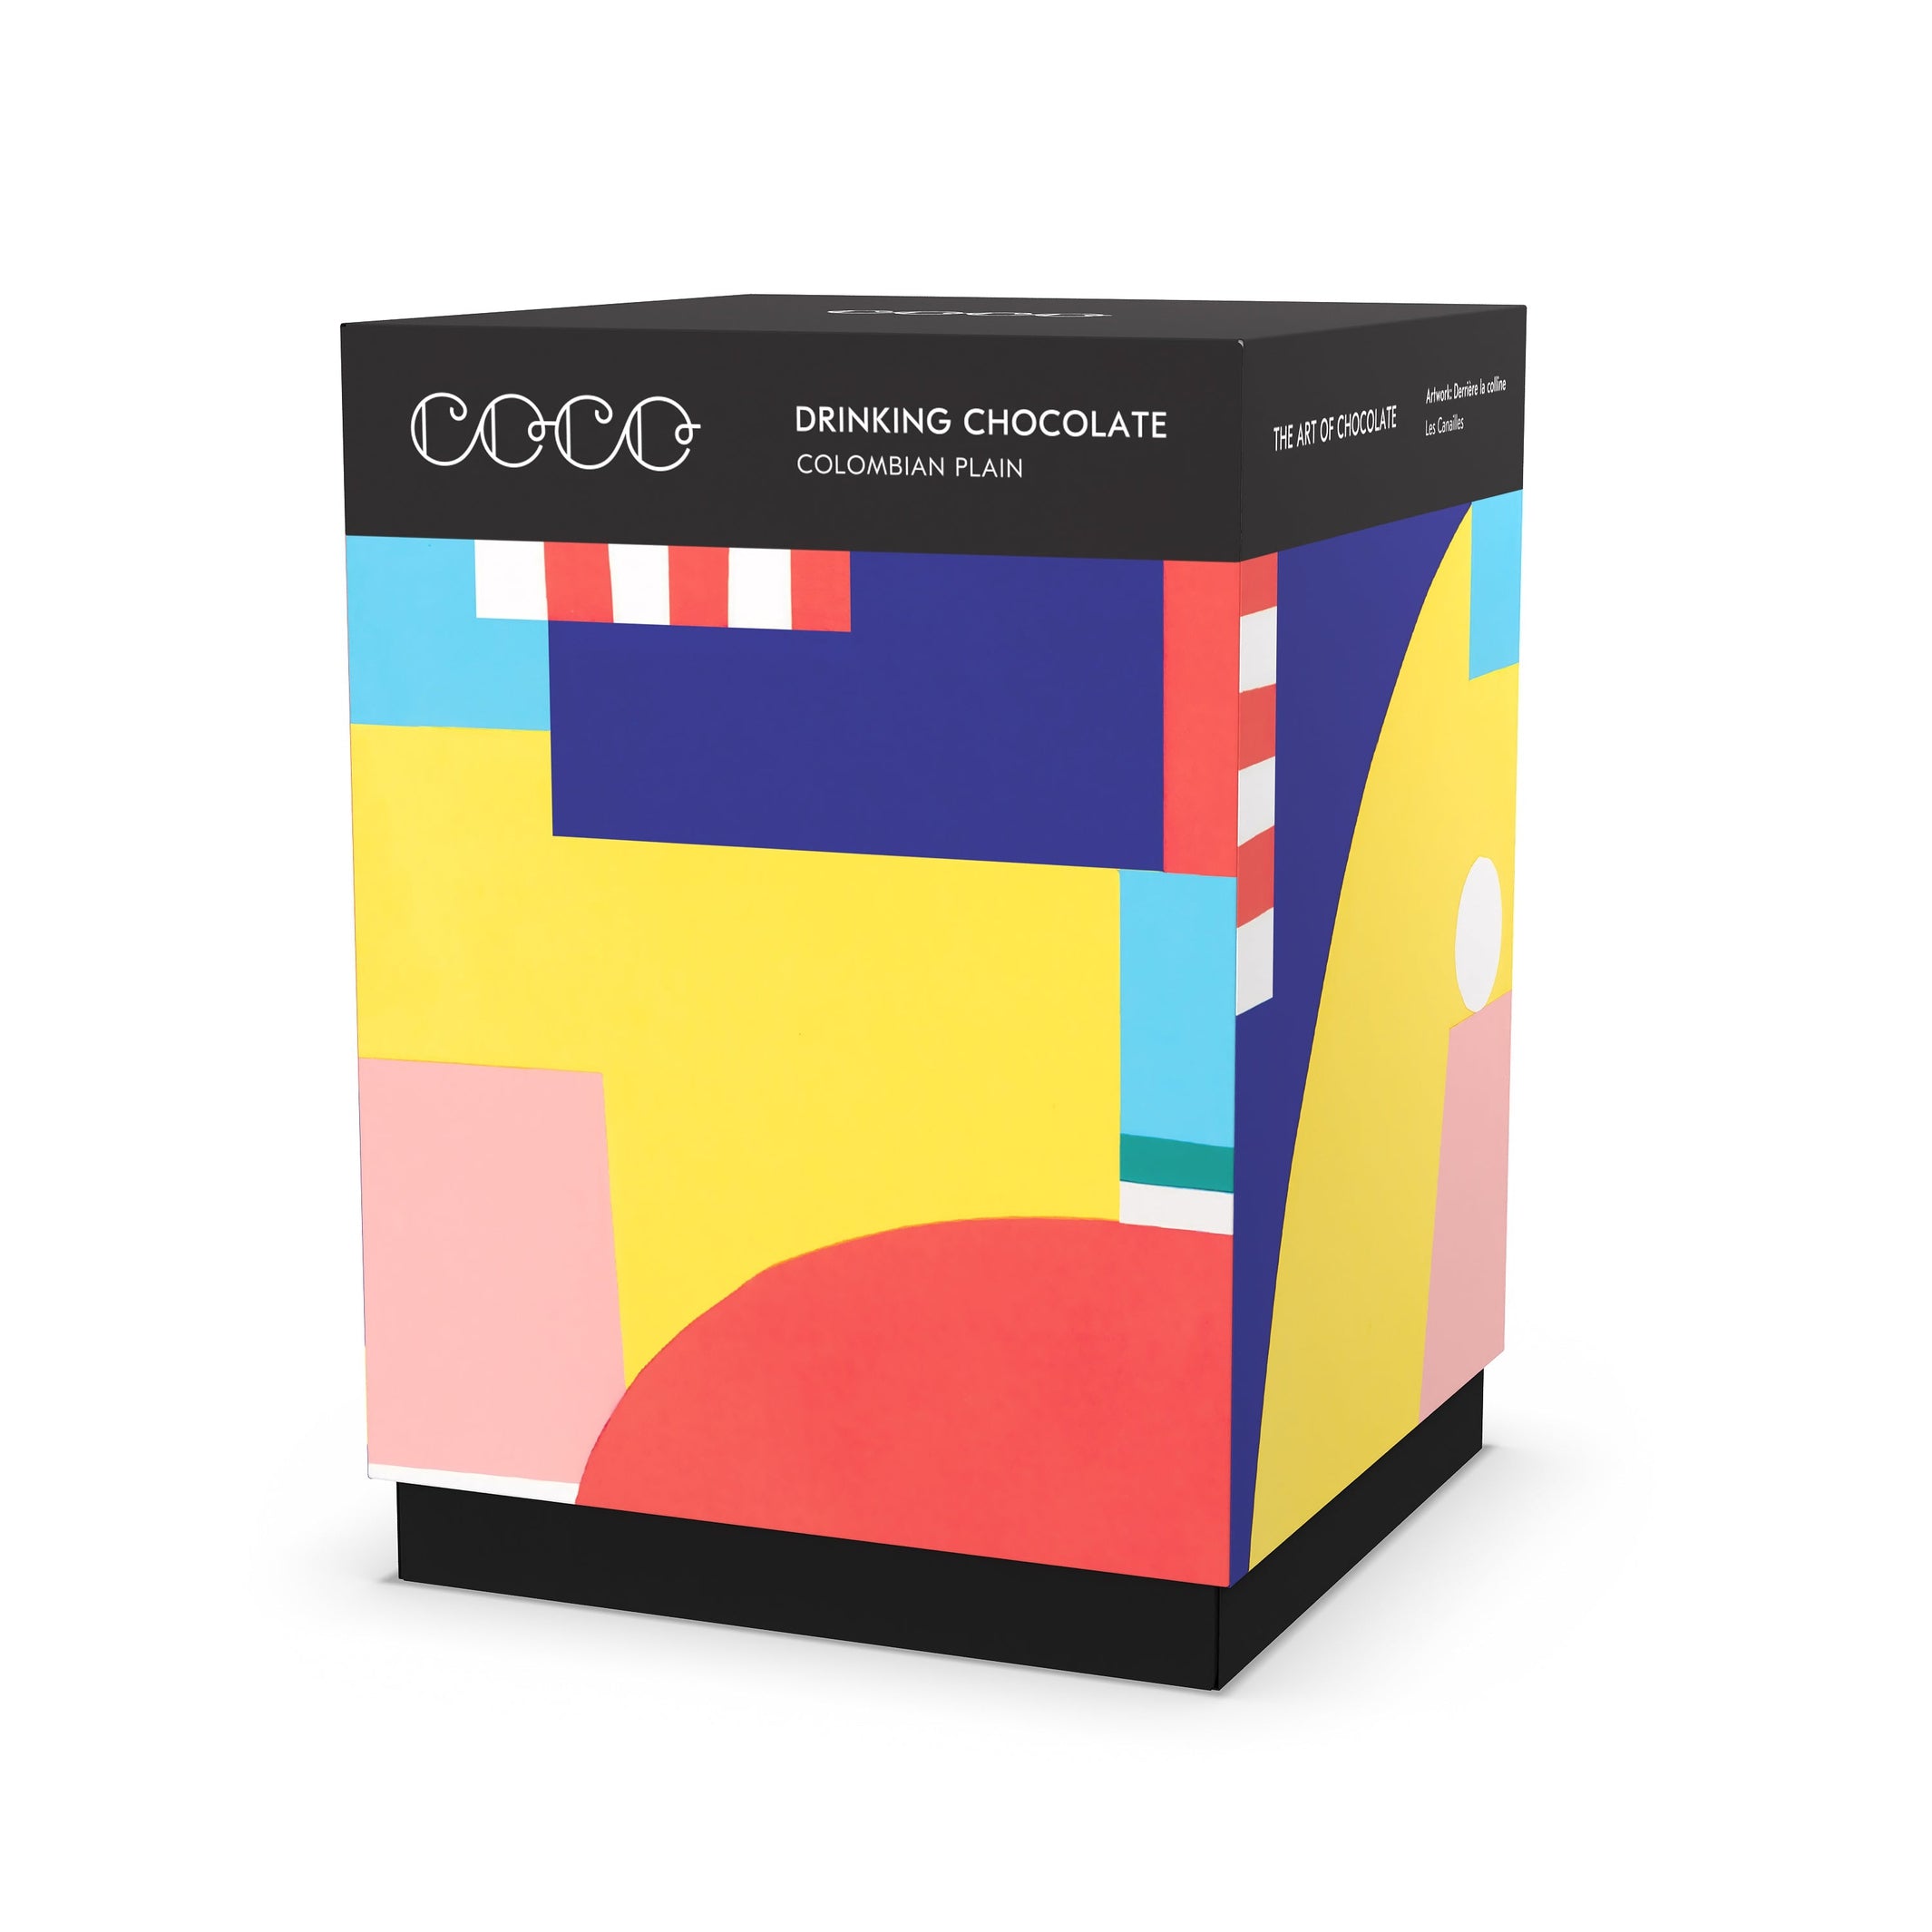 COCO Colombian Plain Drinking Chocolate